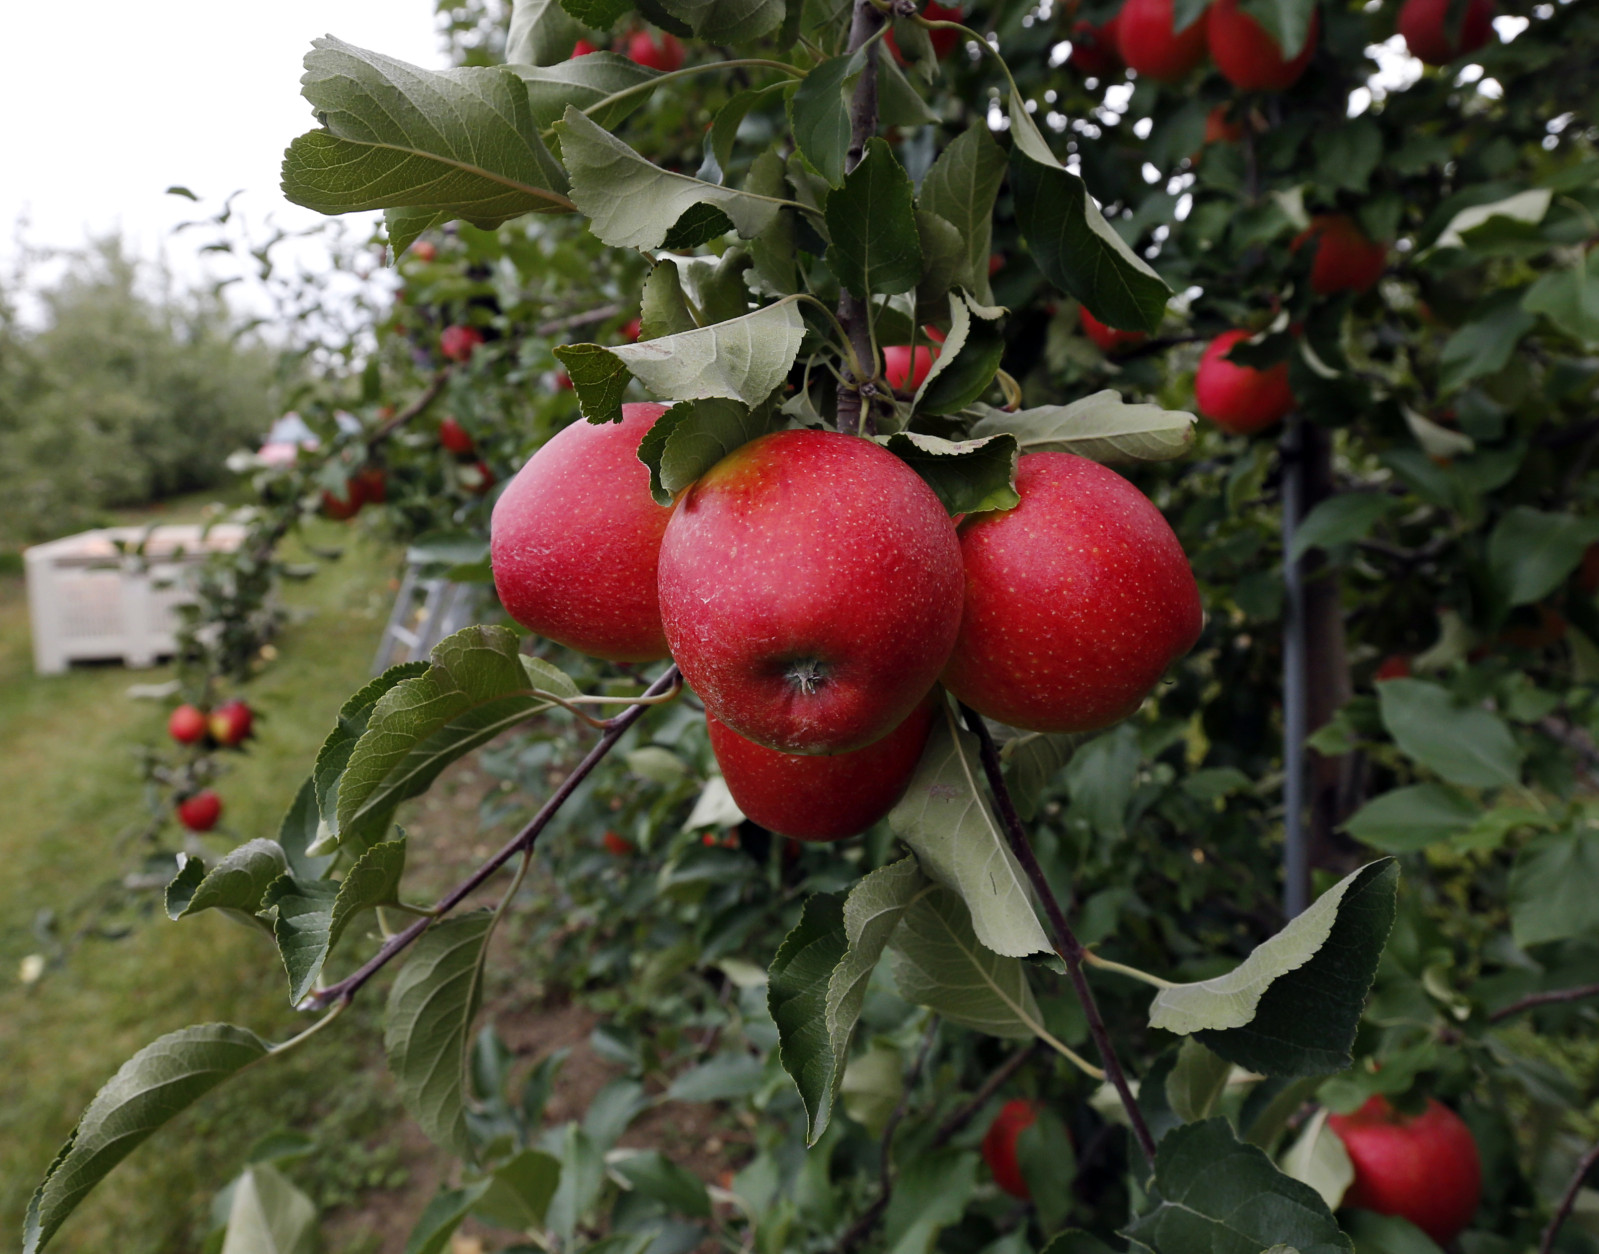 Seventy-five miles outside the nation’s capital is the Washington region’s apple capital. And with the season in full-swing, now is the time to celebrate all things apple. (AP Photo/Mike Groll)